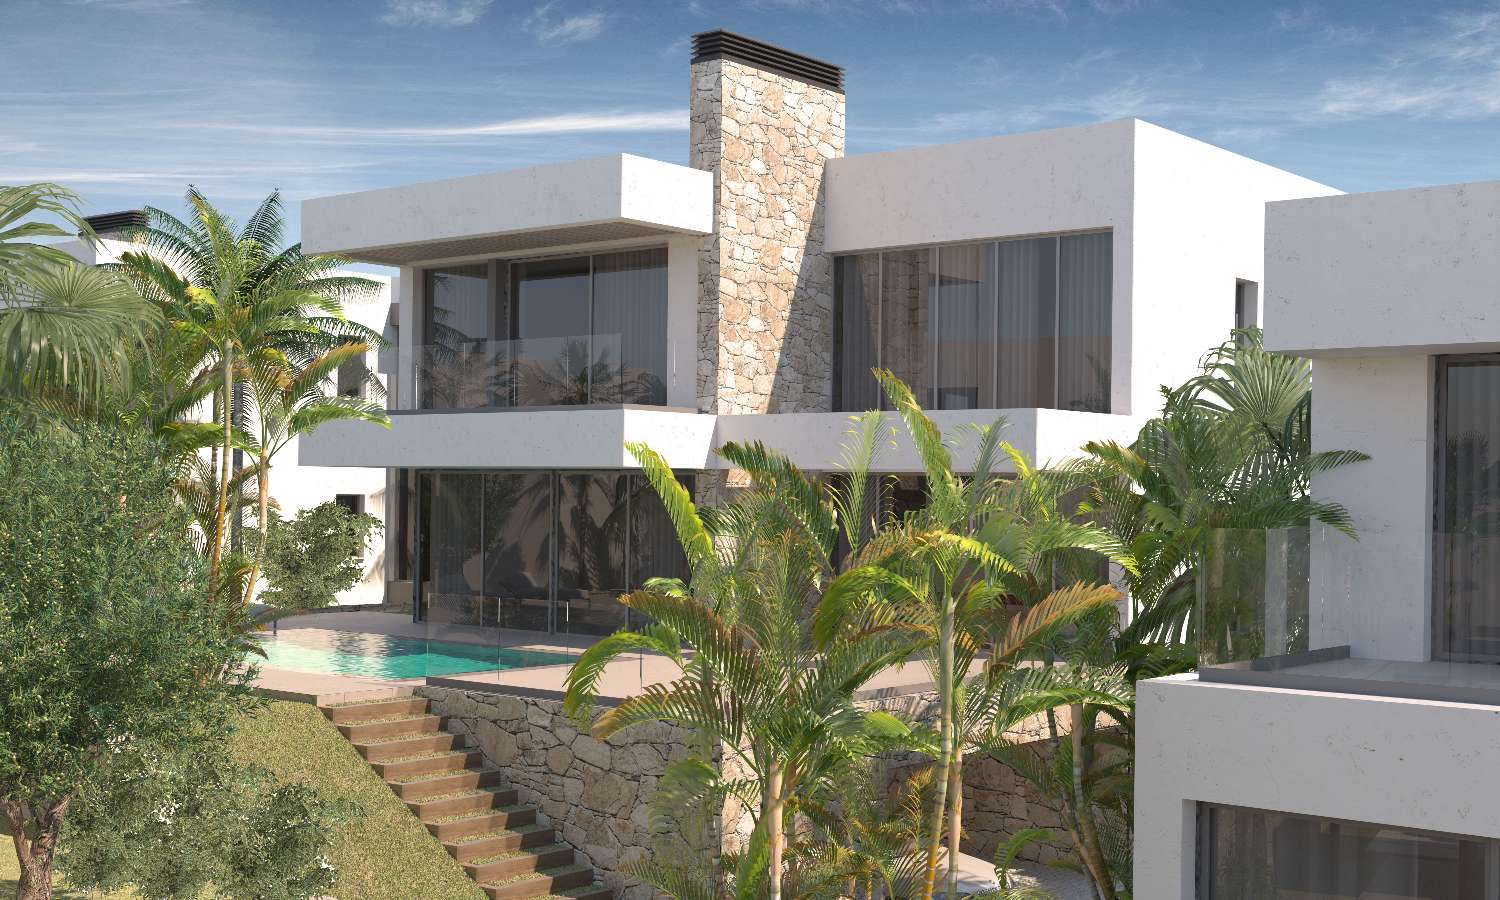 Excellent independent villas 100 meters from the beach!